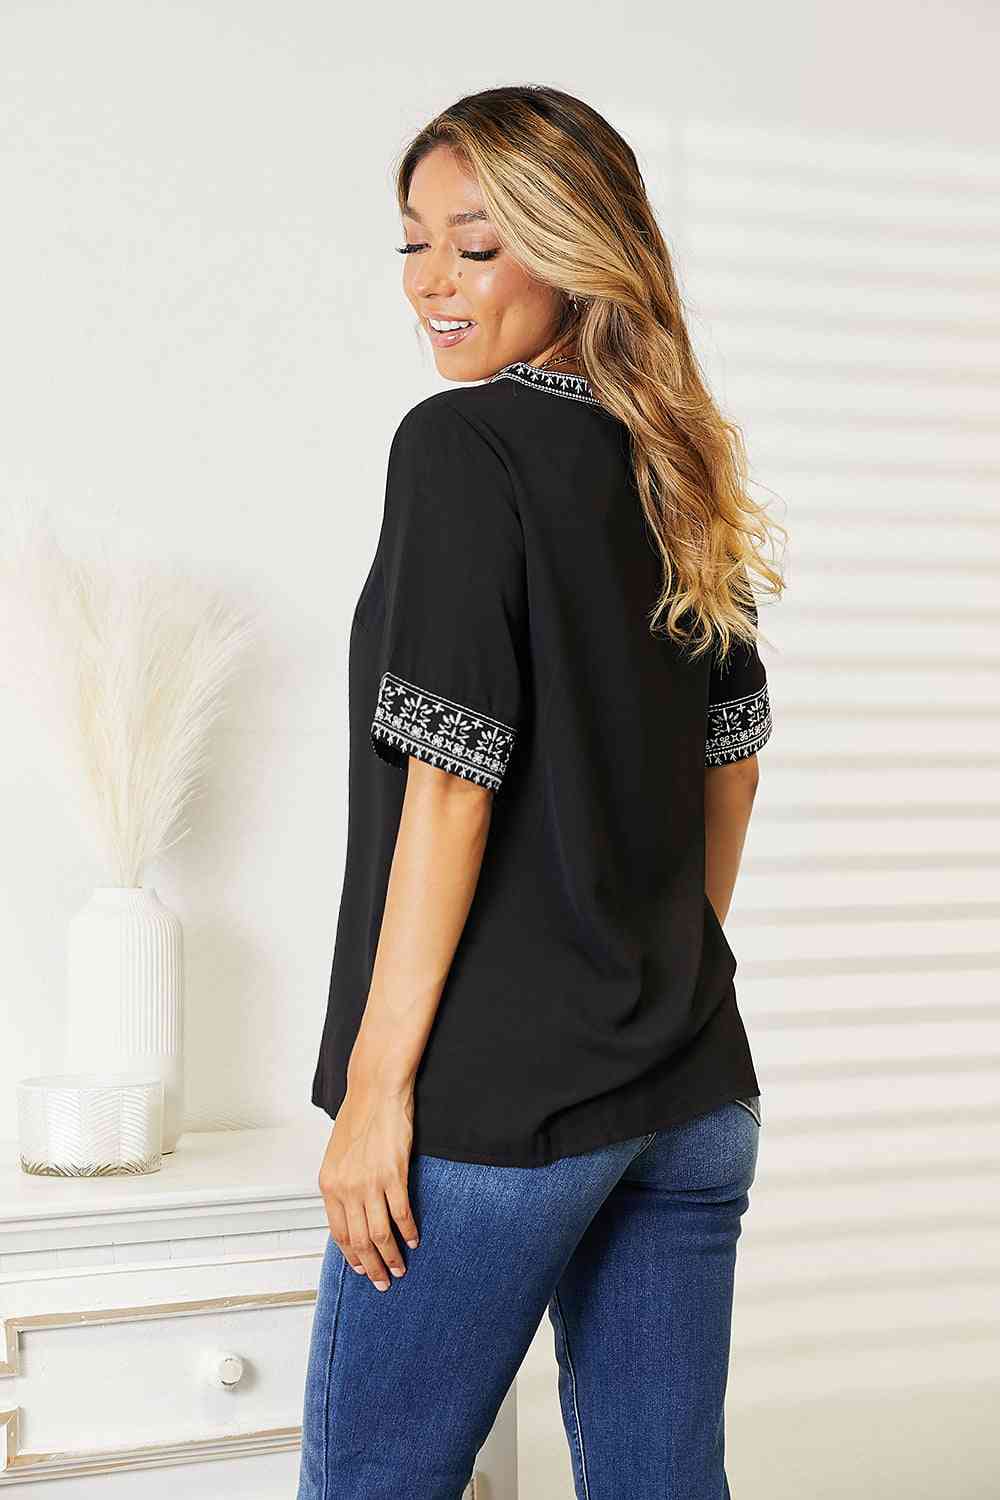 Touch Womens Las Vegas Raiders Sequin Embellished T-Shirt